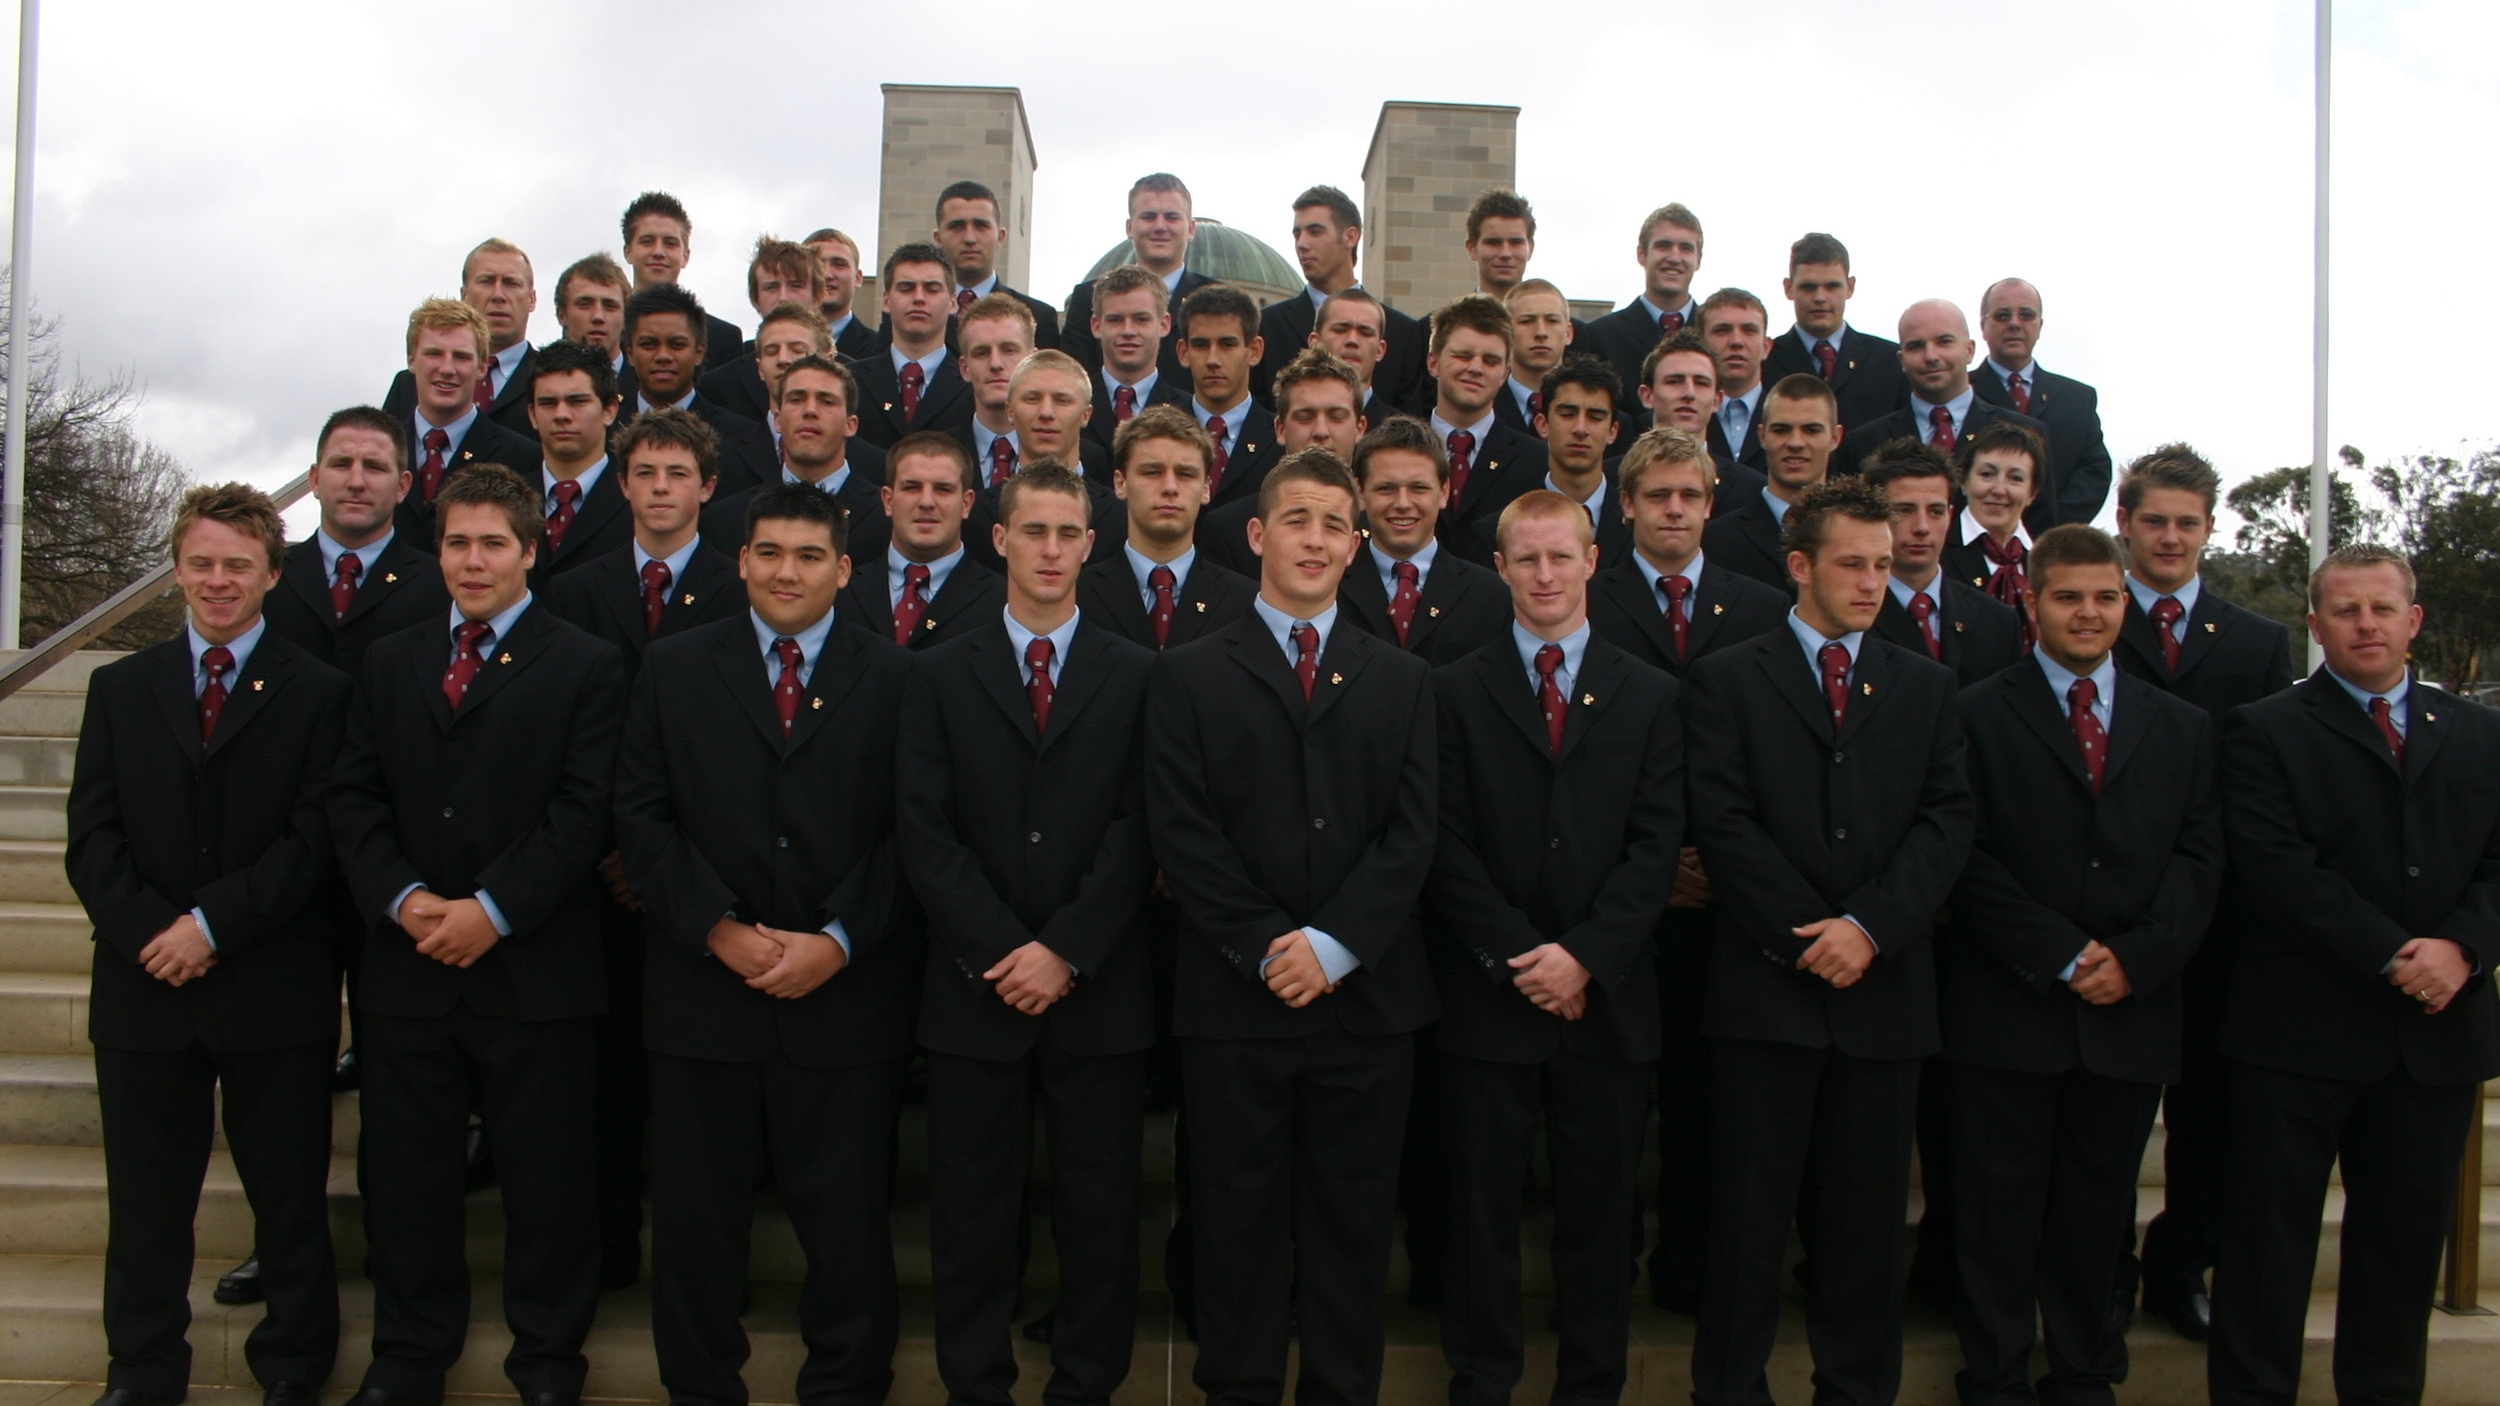 campion school rugby tour